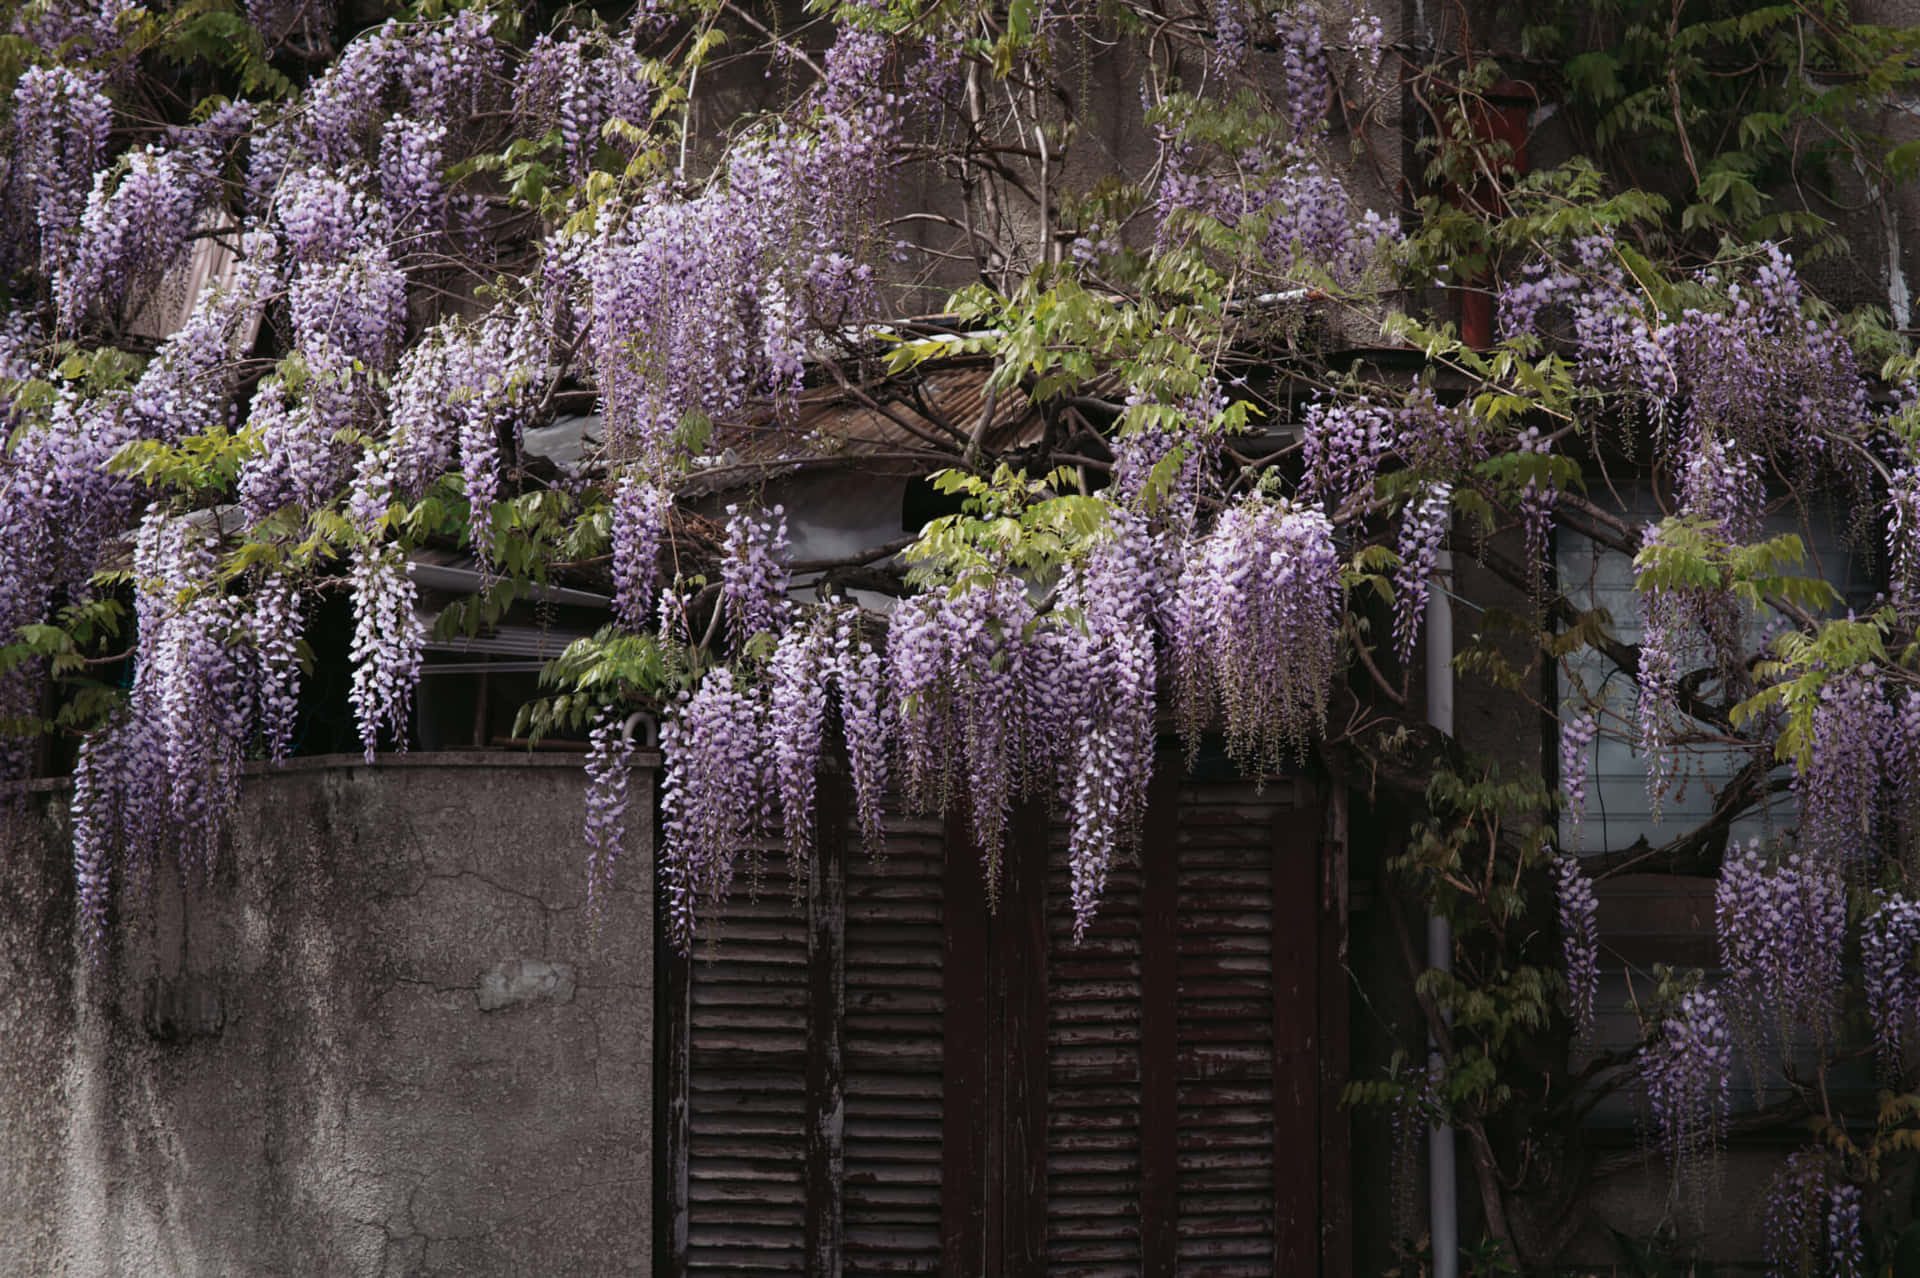 Cascading Wisteria Over Old Building.jpg Wallpaper